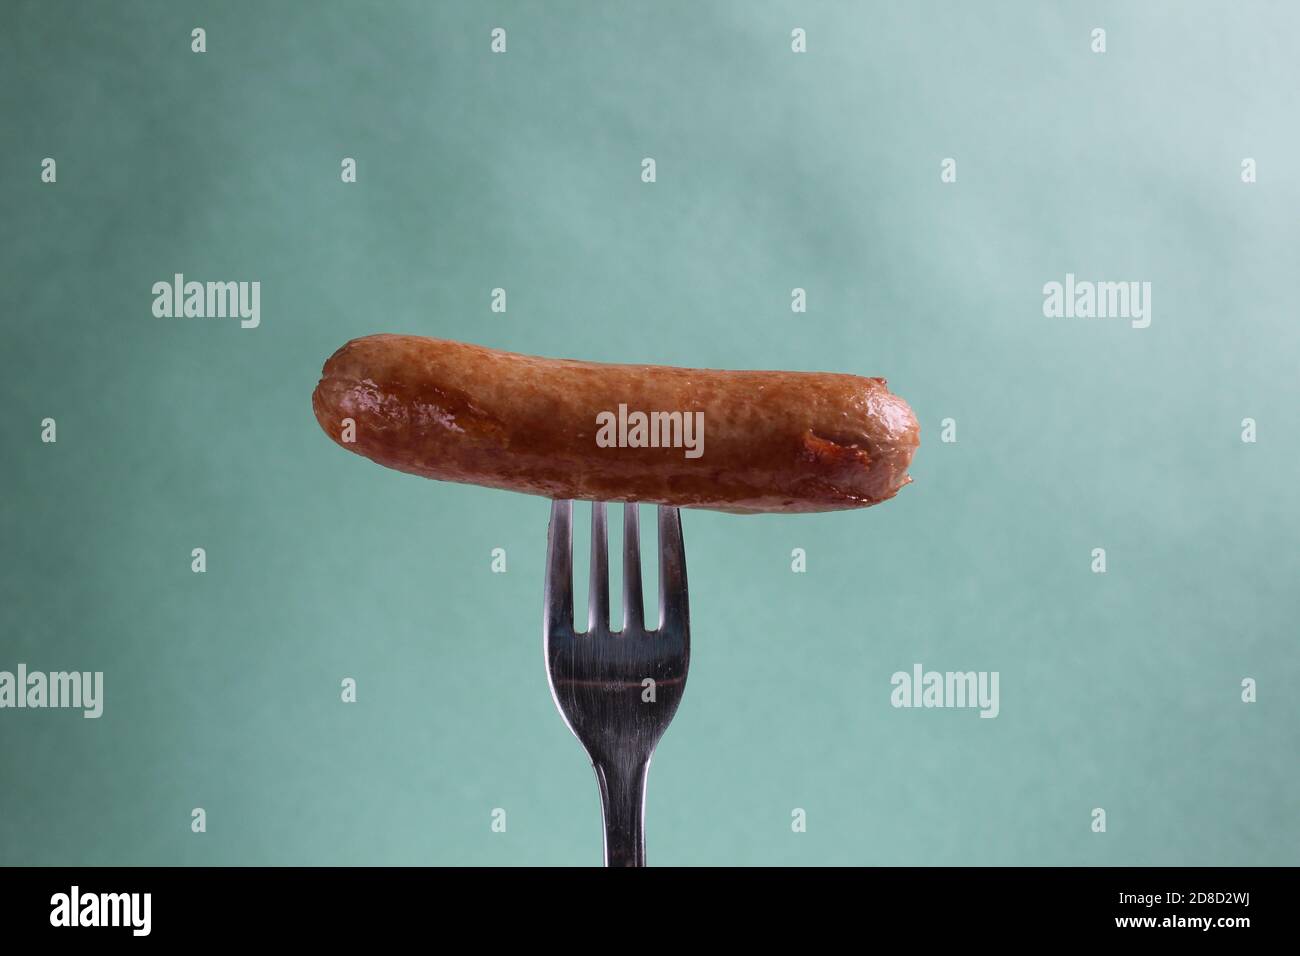 a sausage a fried sausage is pinned on a fork on a green light colored background of copy space Stock Photo